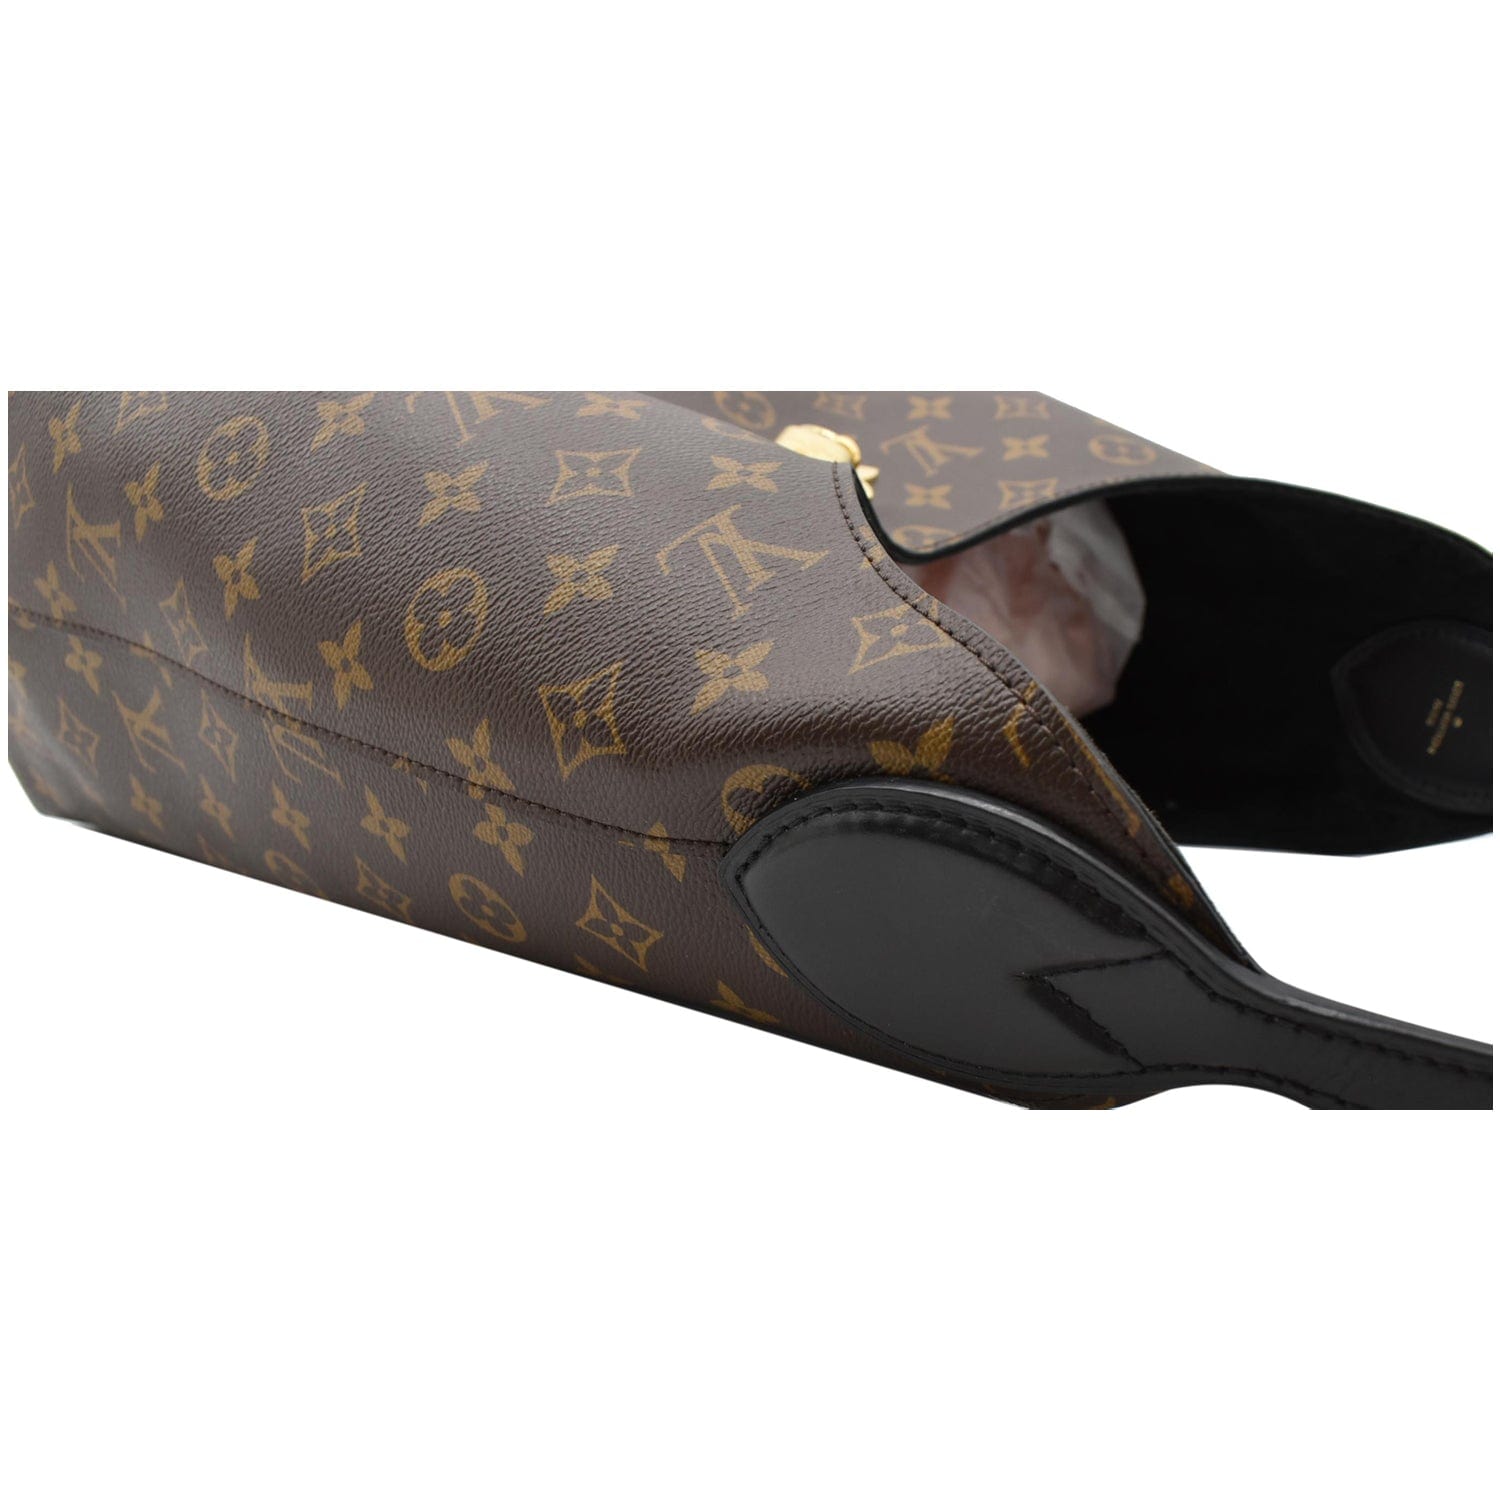 Louis Vuitton Flower Hobo Review 